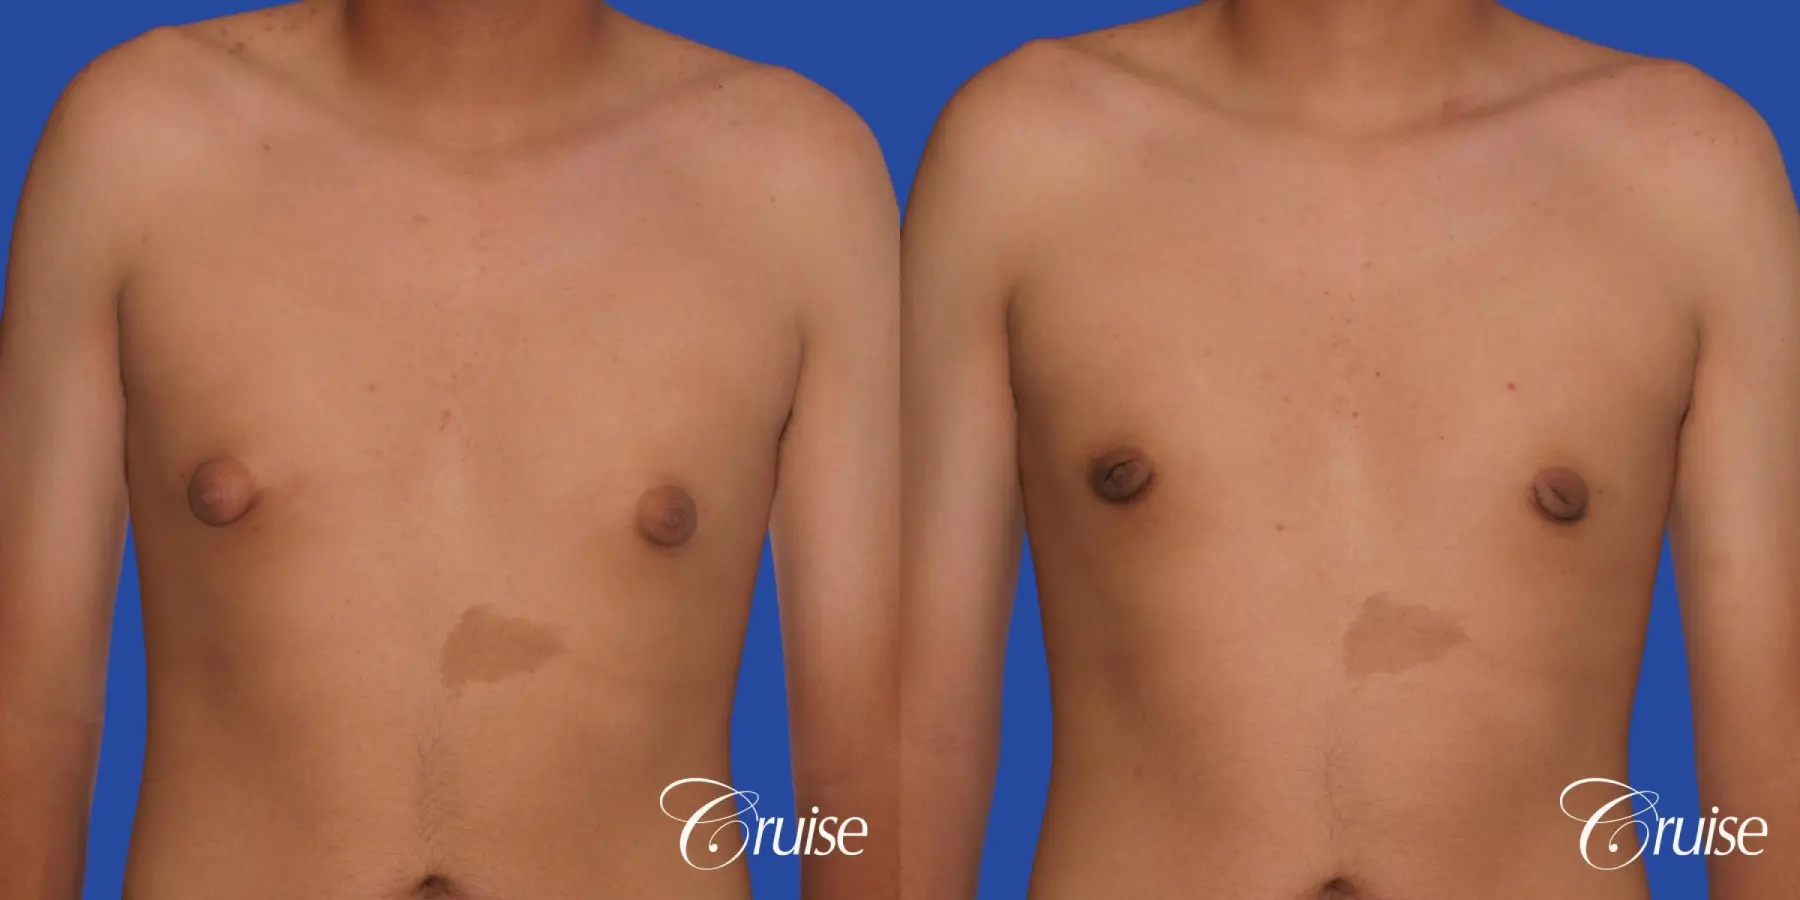 gynecomastia patient gets nipple reduction for best results - Before and After 1